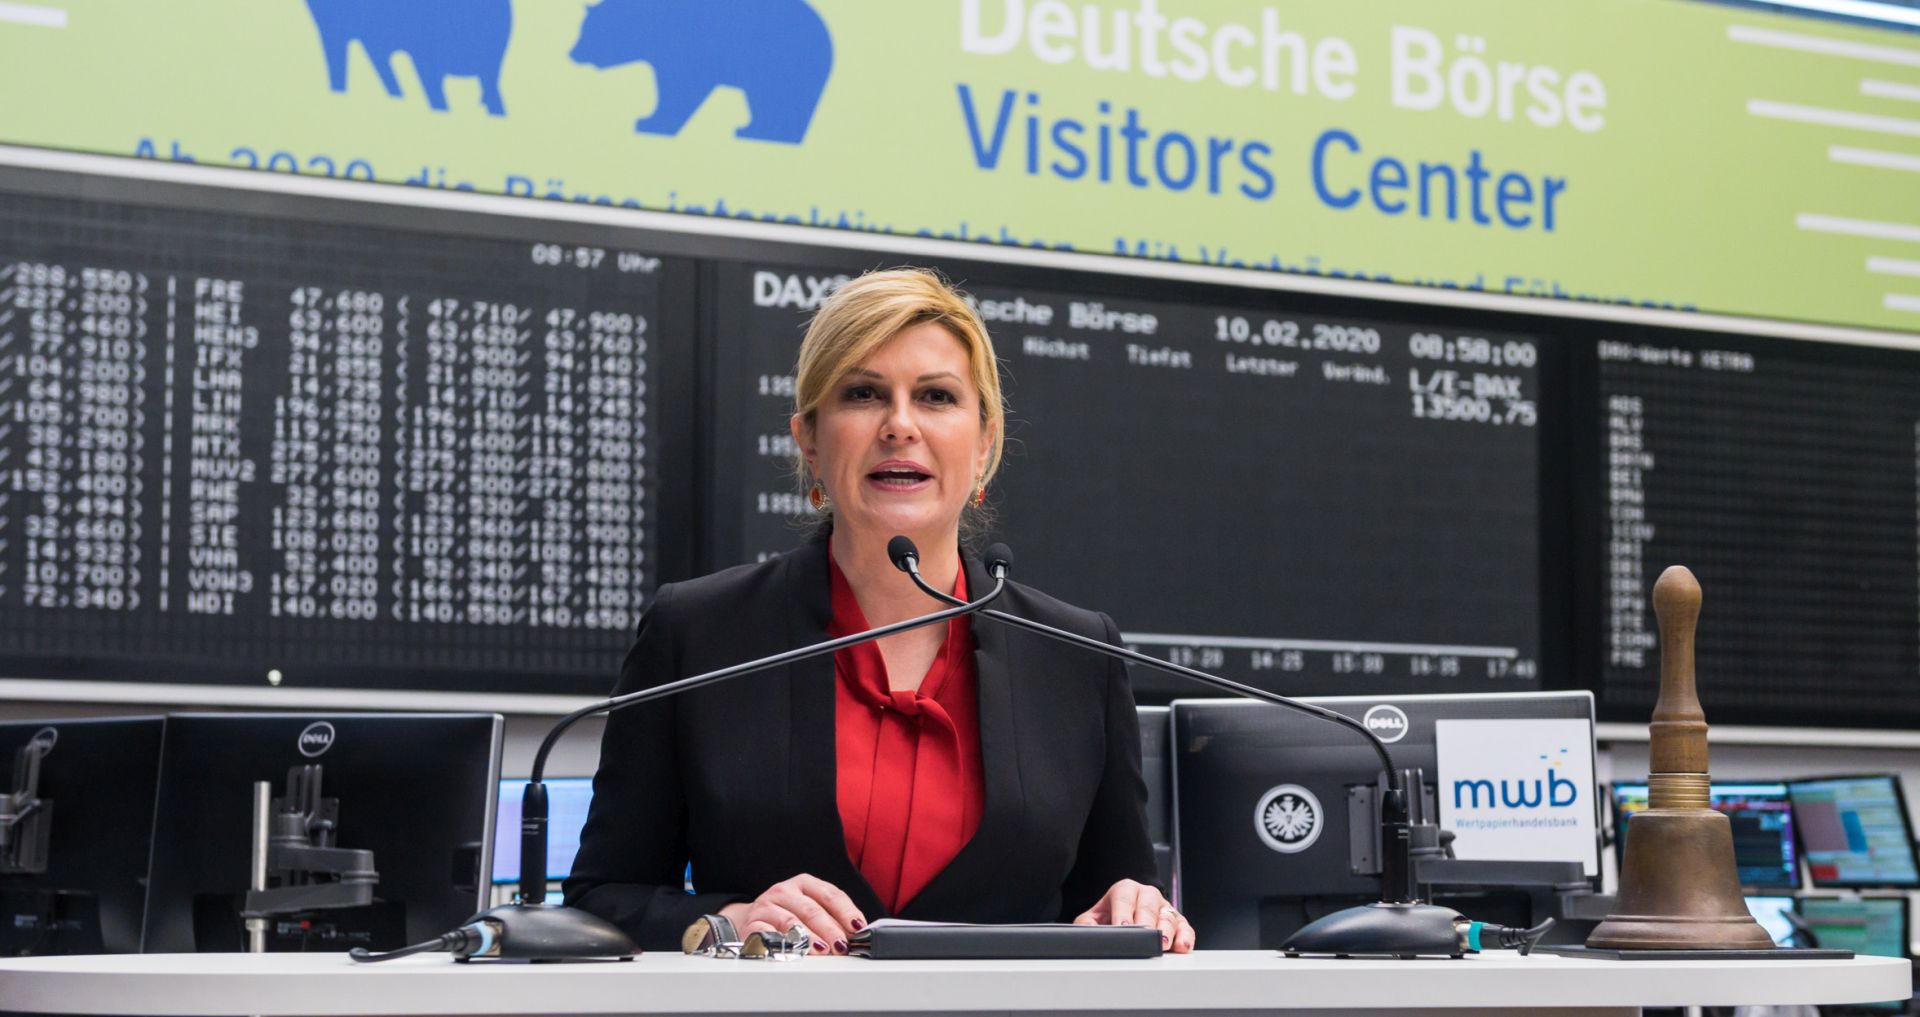 epa08208579 A handout photo made available by Frankfurt Stock Exchange 'Deutsche Boerse AG' shows President of Croatia Kolinda Grabar-Kitarovic delivering a speech during a visit to the Stock Market in Frankfurt am Main, Germany, 10 February 2020.  EPA/MARTIN JOPPEN / HANDOUT  HANDOUT EDITORIAL USE ONLY/NO SALES